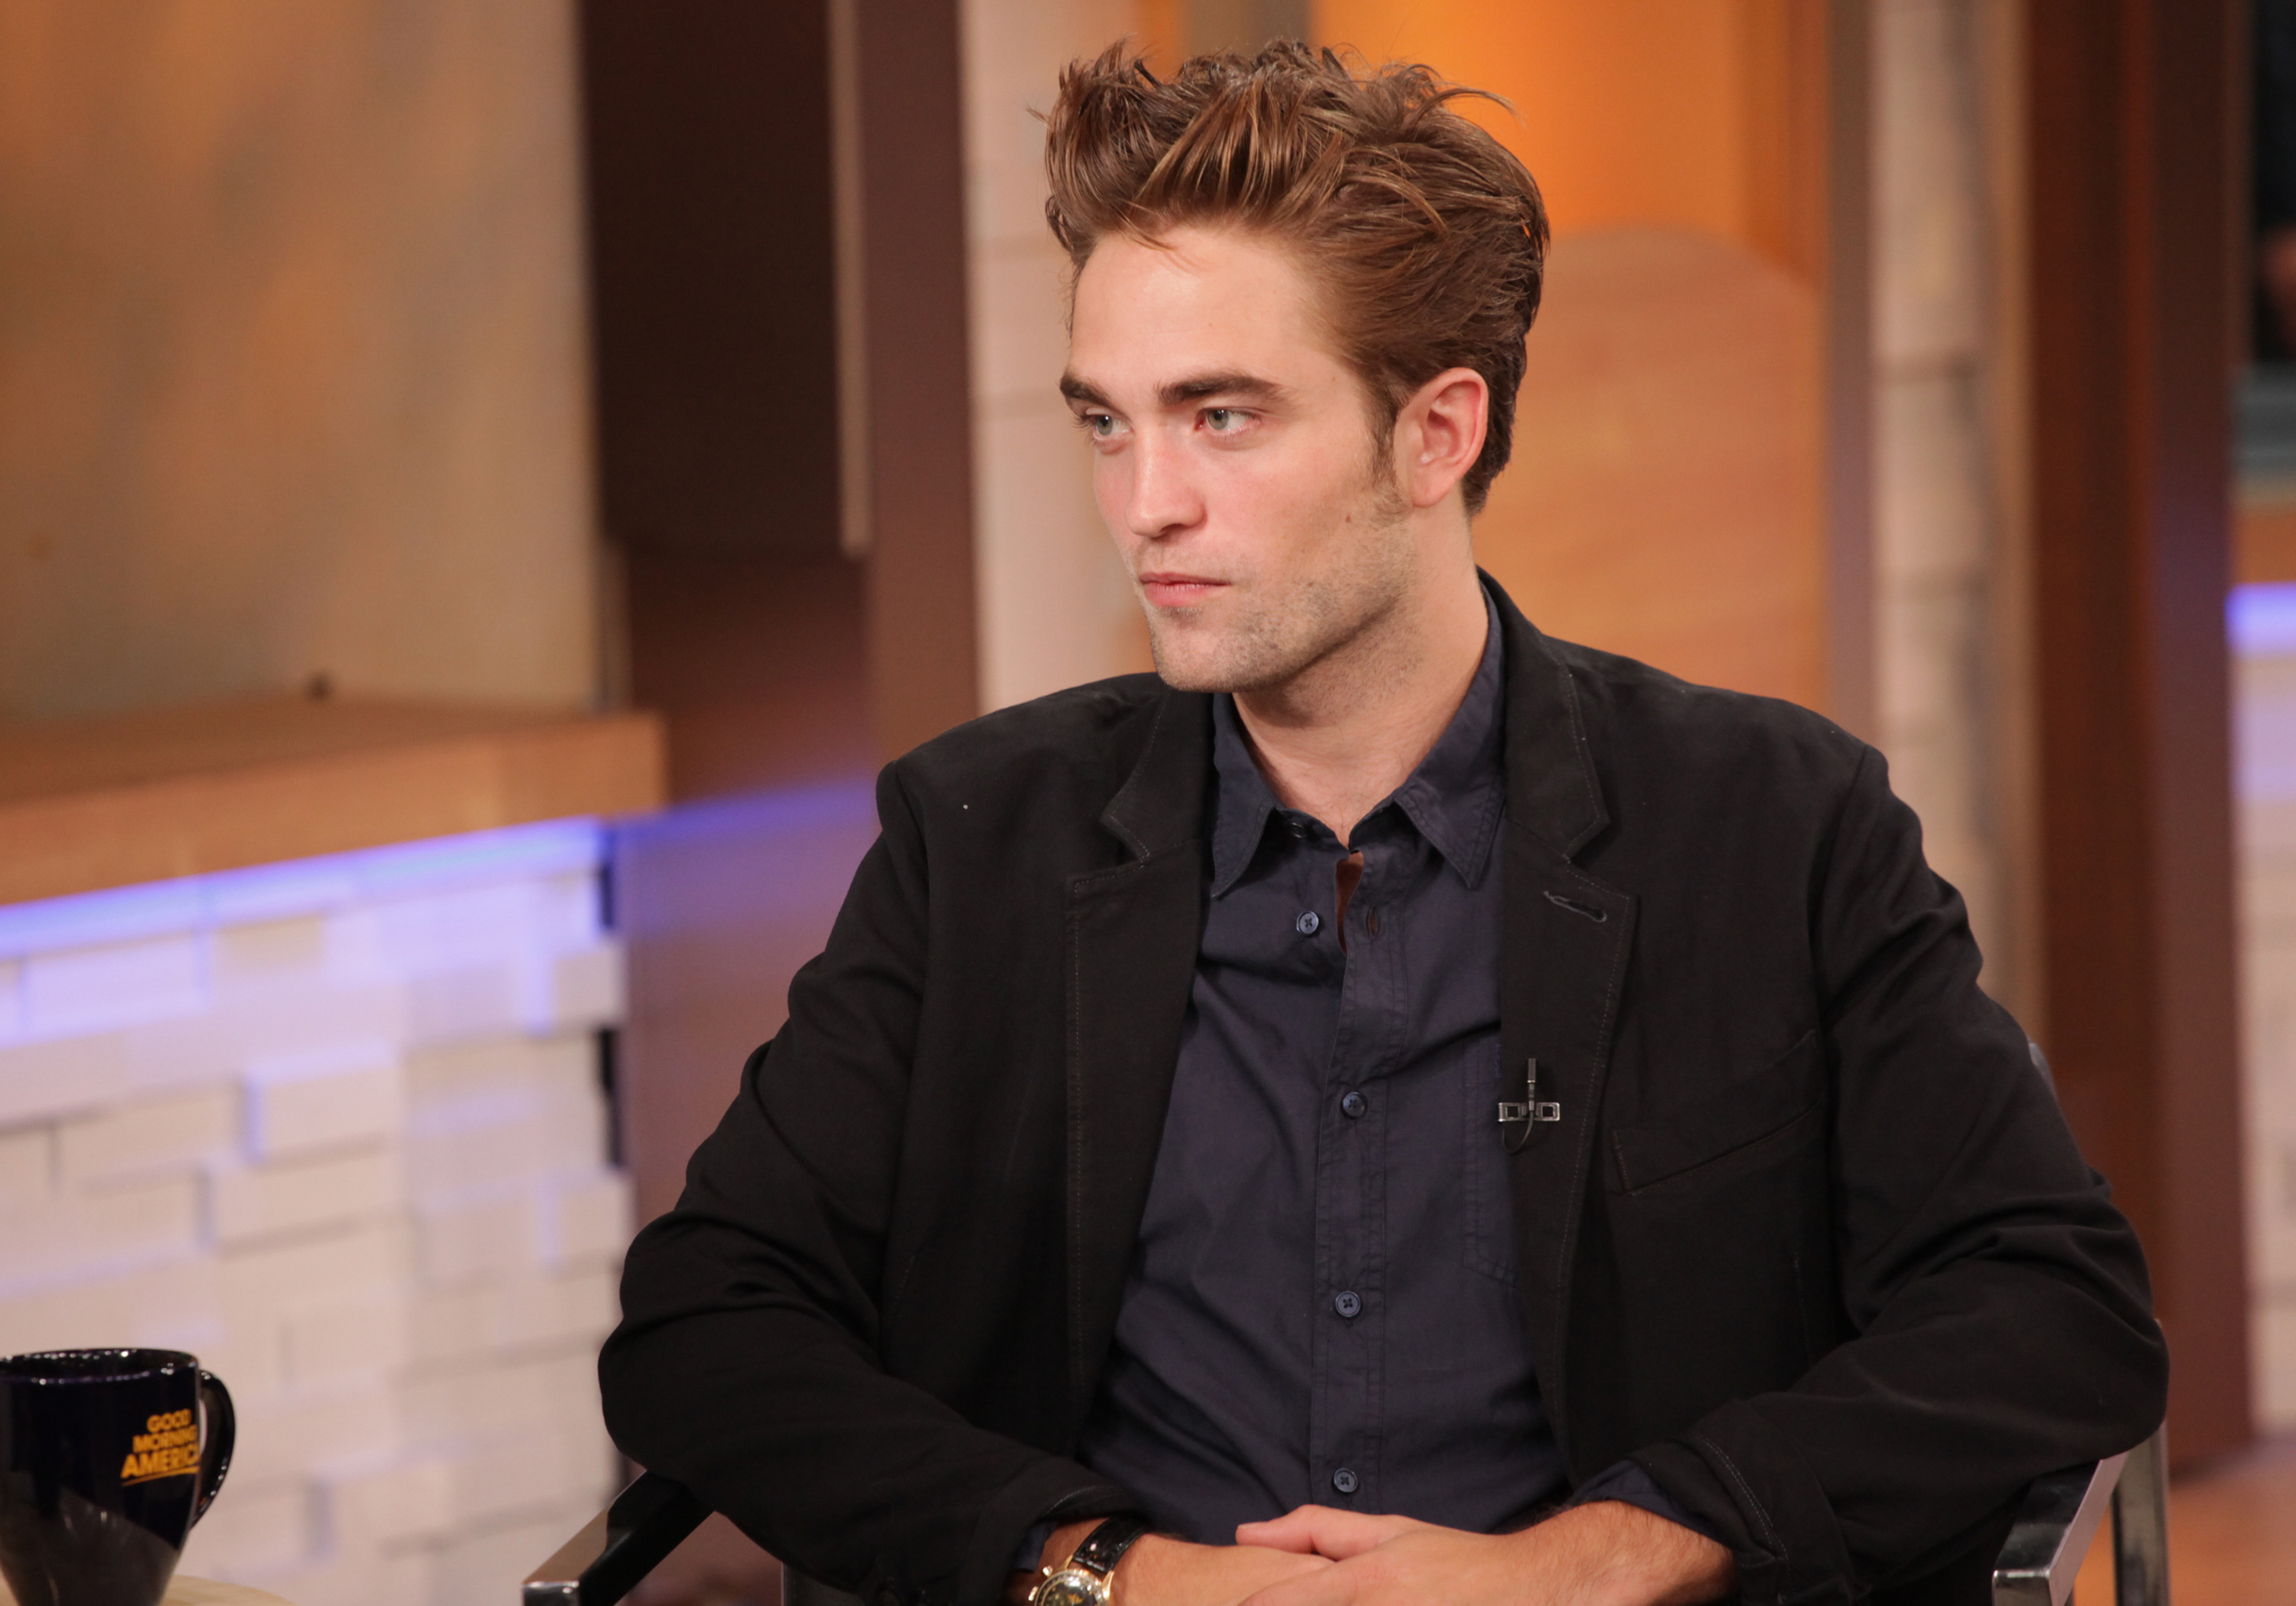 The Guardian: “Robert Pattinson to Play Lawrence of Arabia